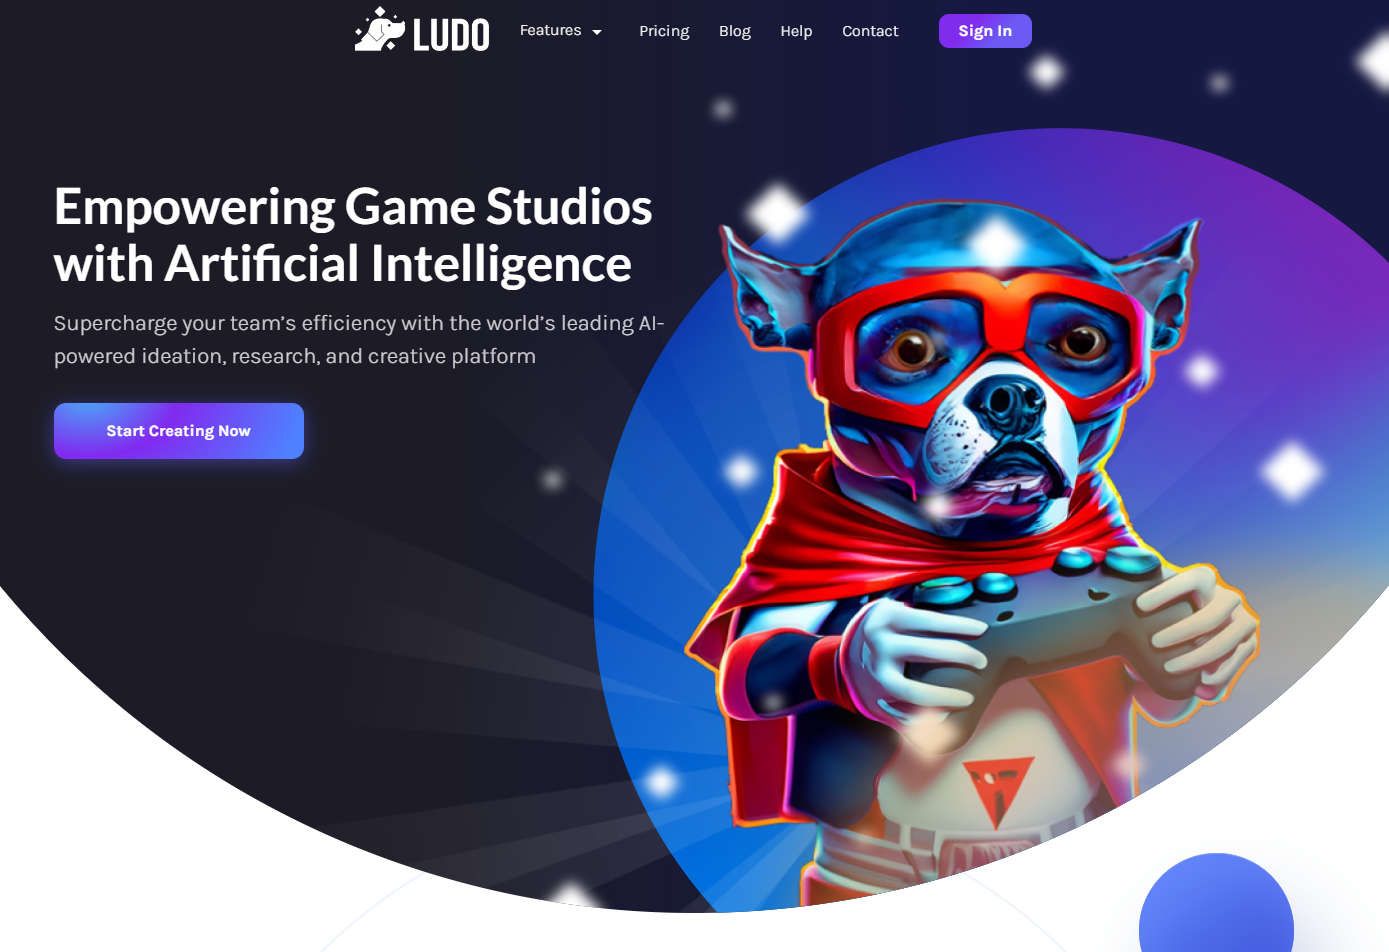 The homepage for Ludo.ai.